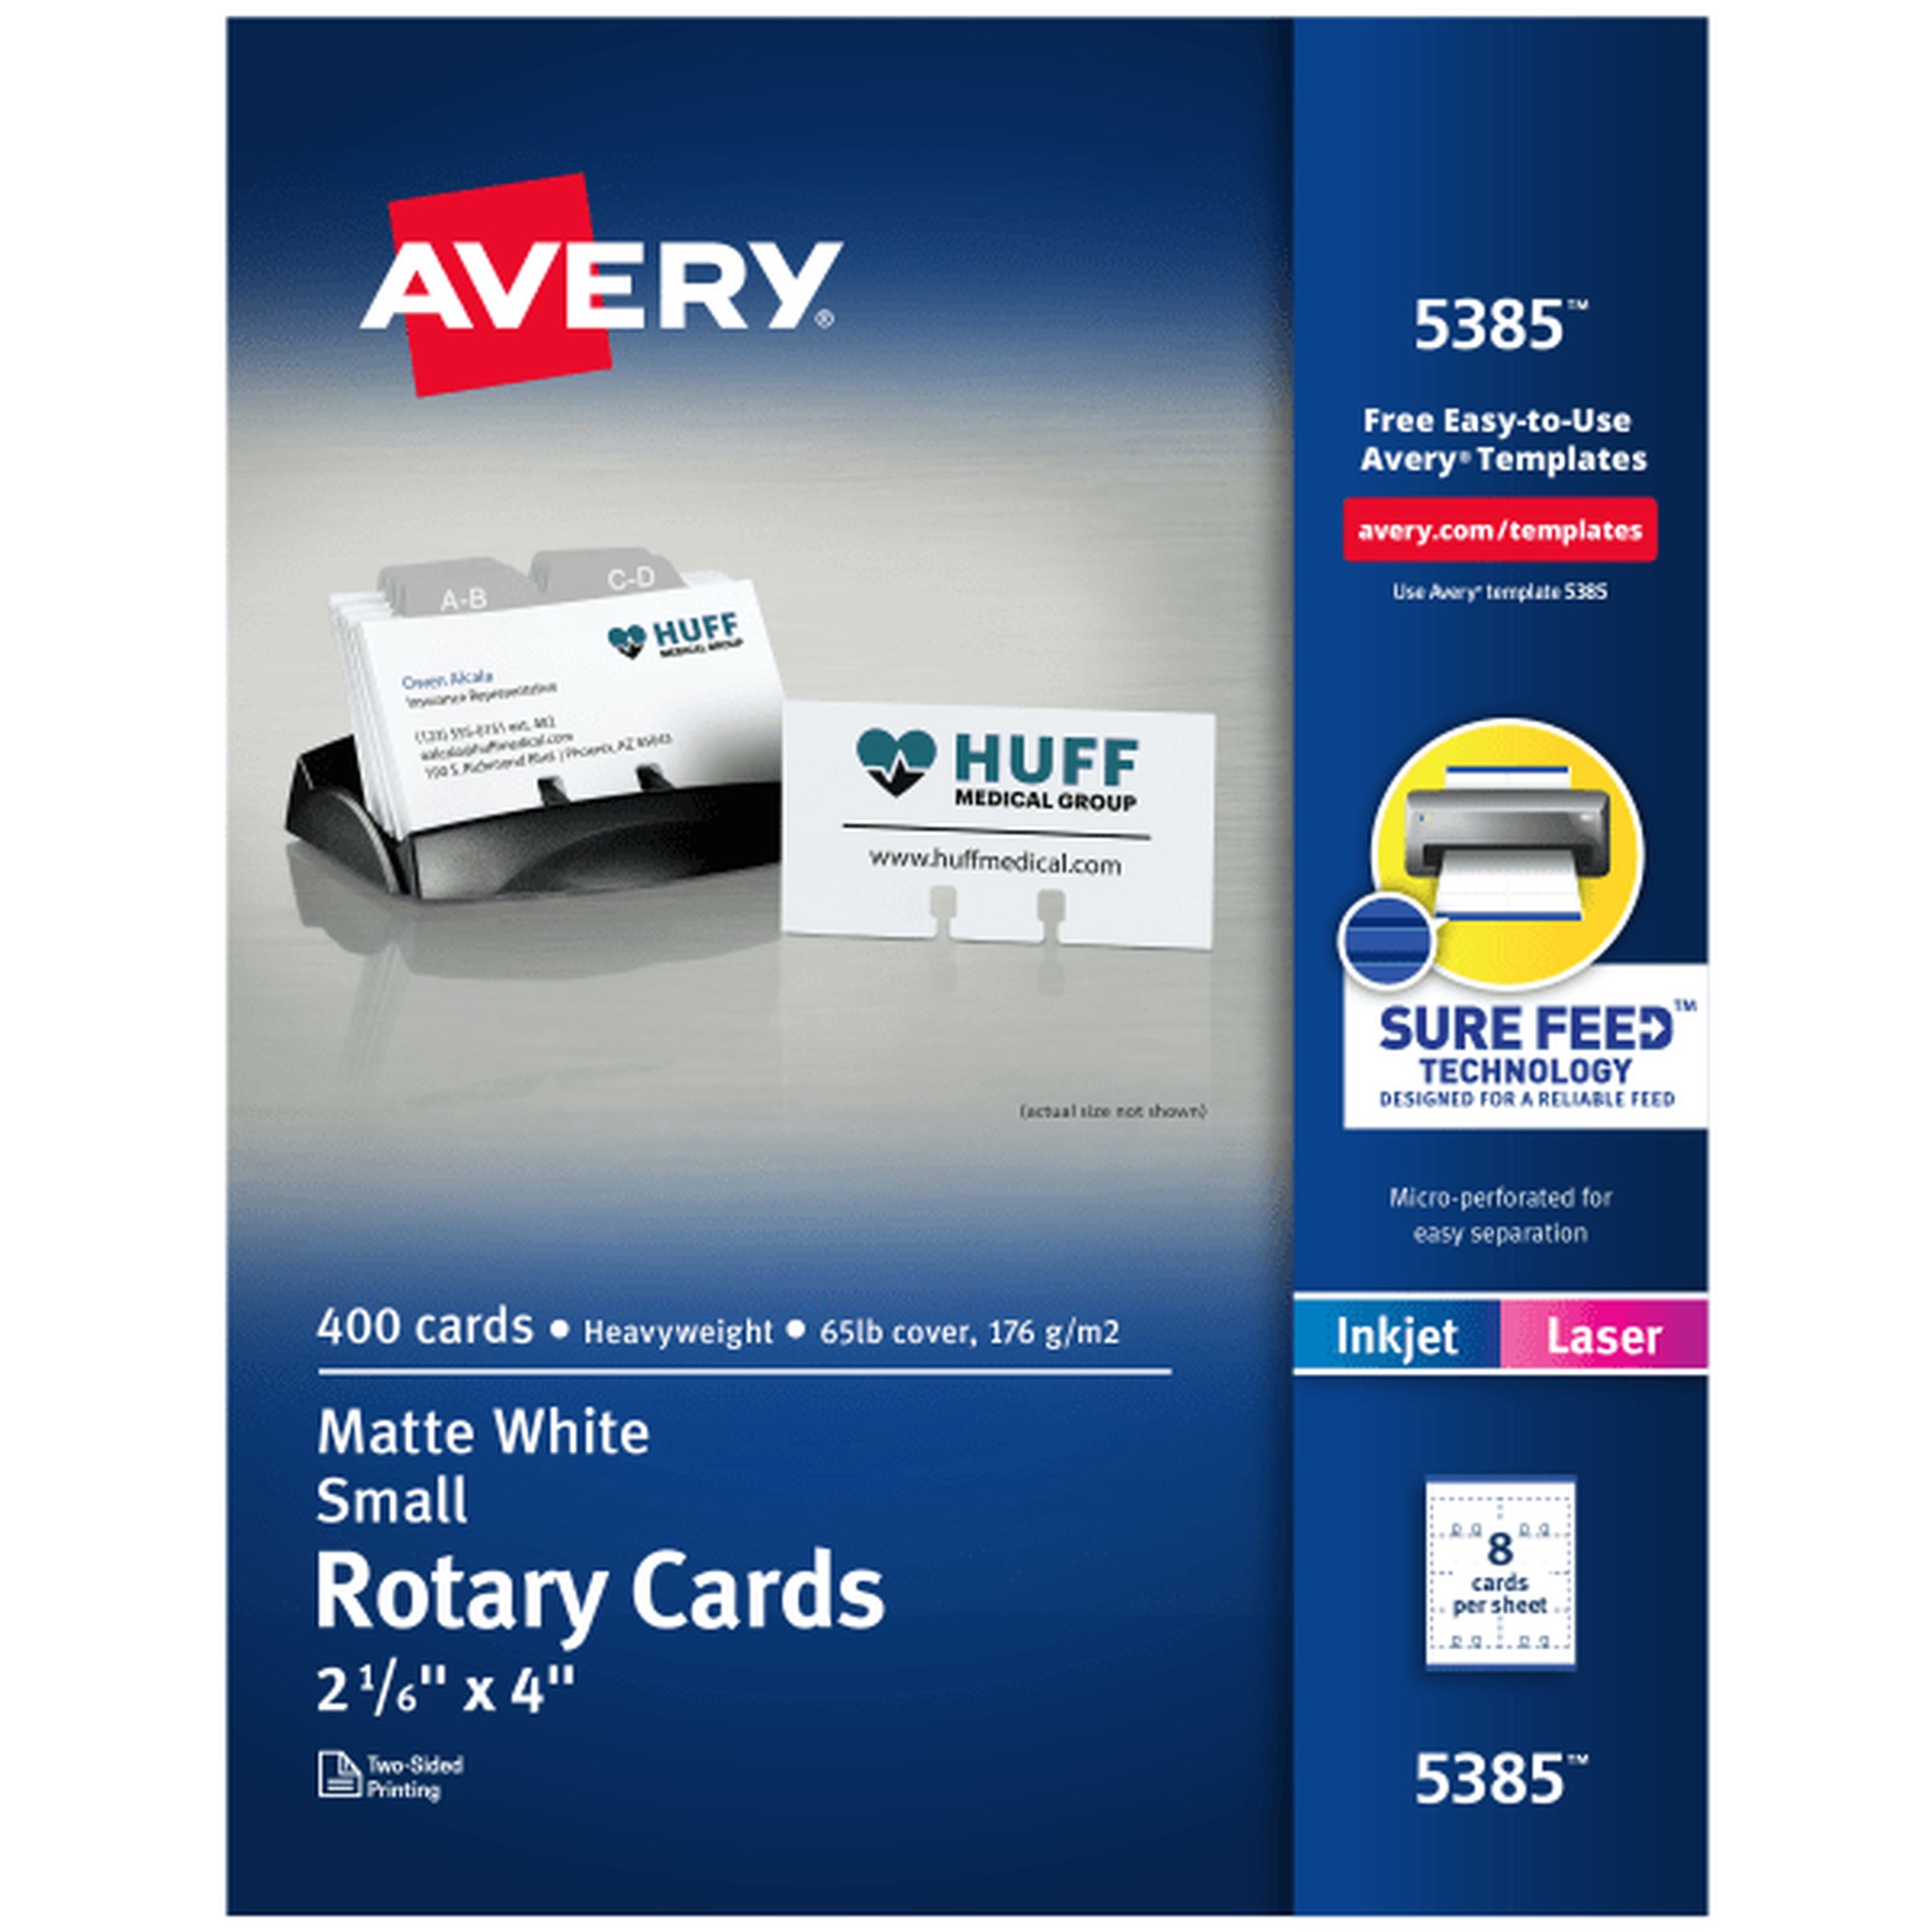 Avery Uncoated 2-side Printing Rotary Cards - 2 5/32" x 4" - 400 / Box - 8 - Perforated, Heavyweight, Double-sided, Printab